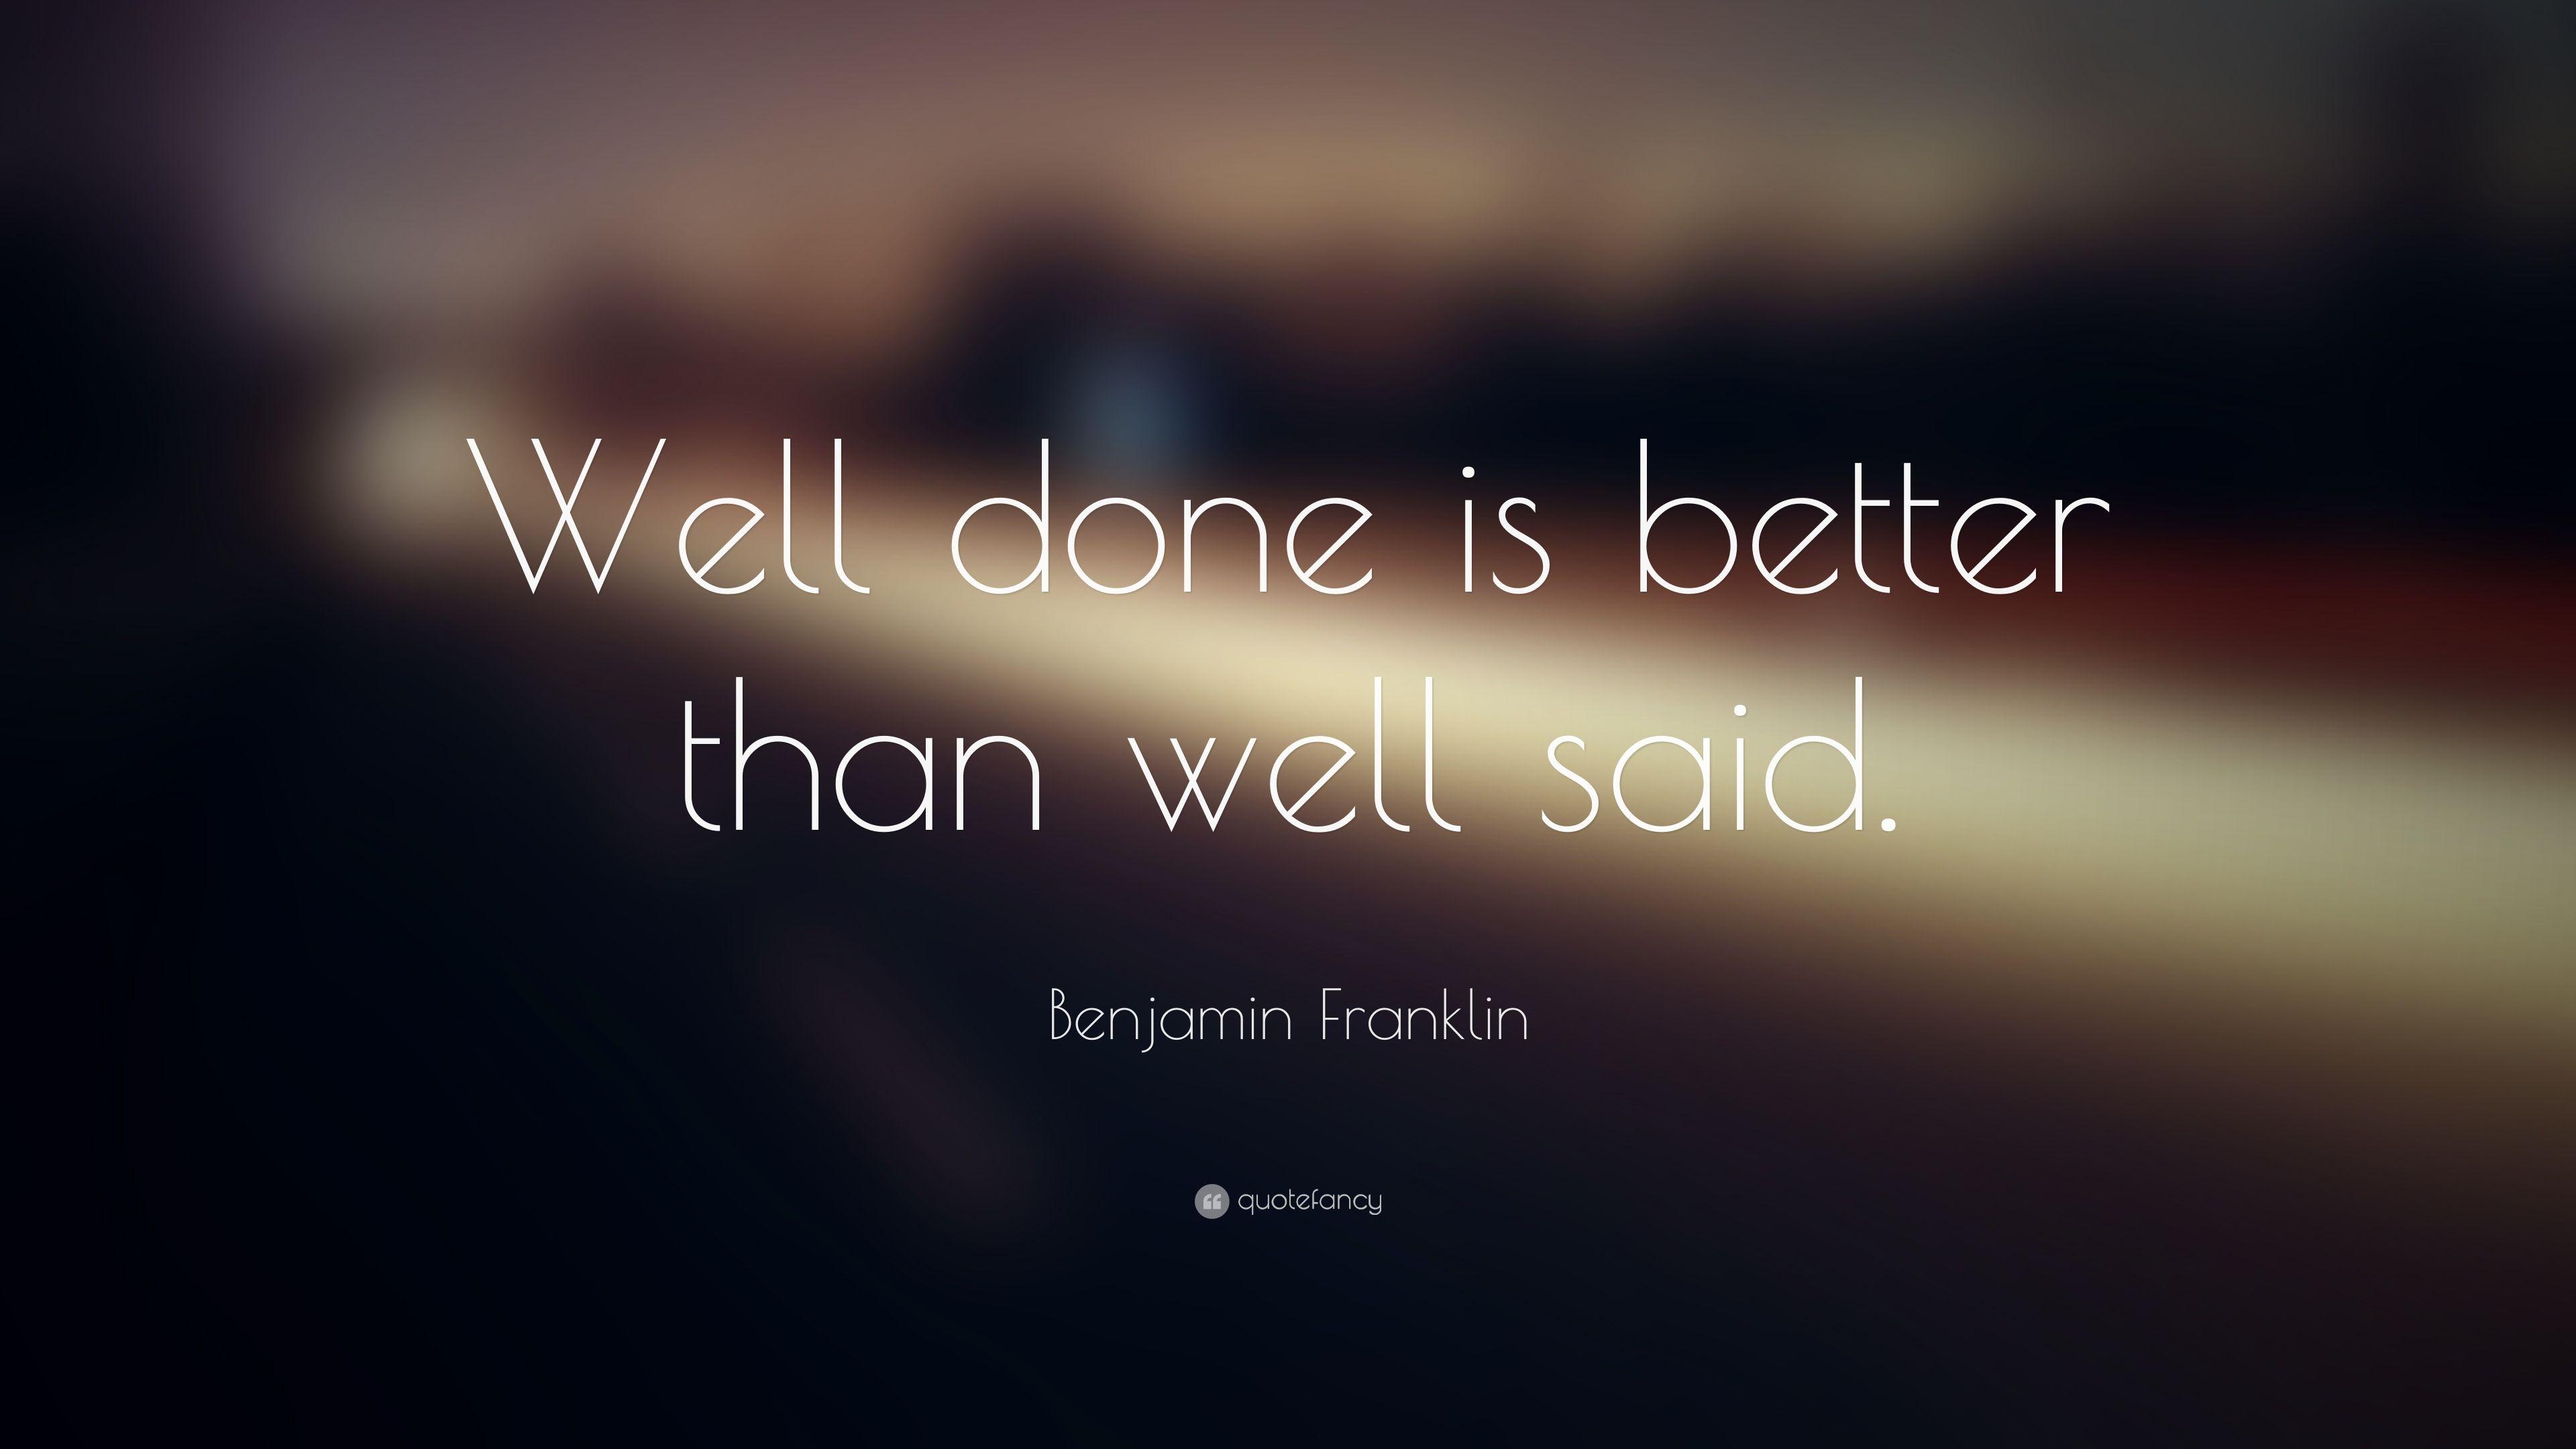 Benjamin Franklin Quote: “Well done is better than well said.” 27